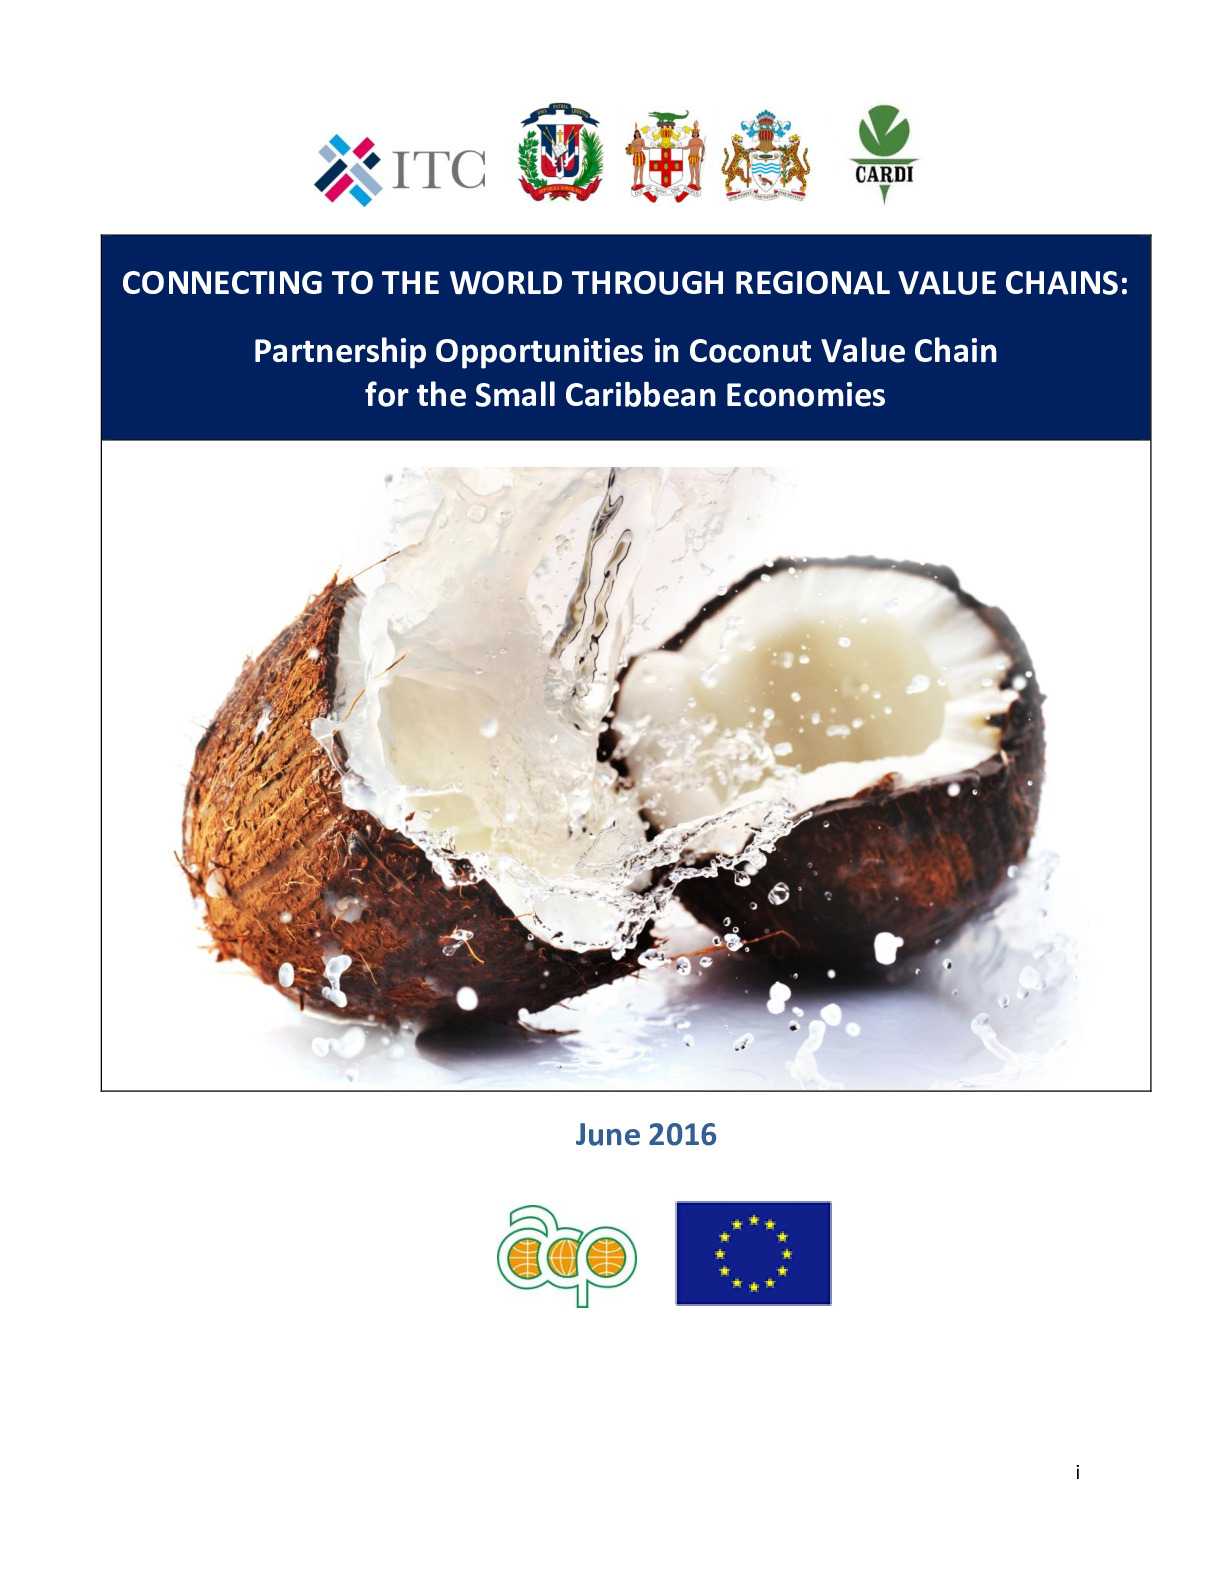 2connecting-to-world-through-regional-value-chains-partnership-opportunities-coconut-value